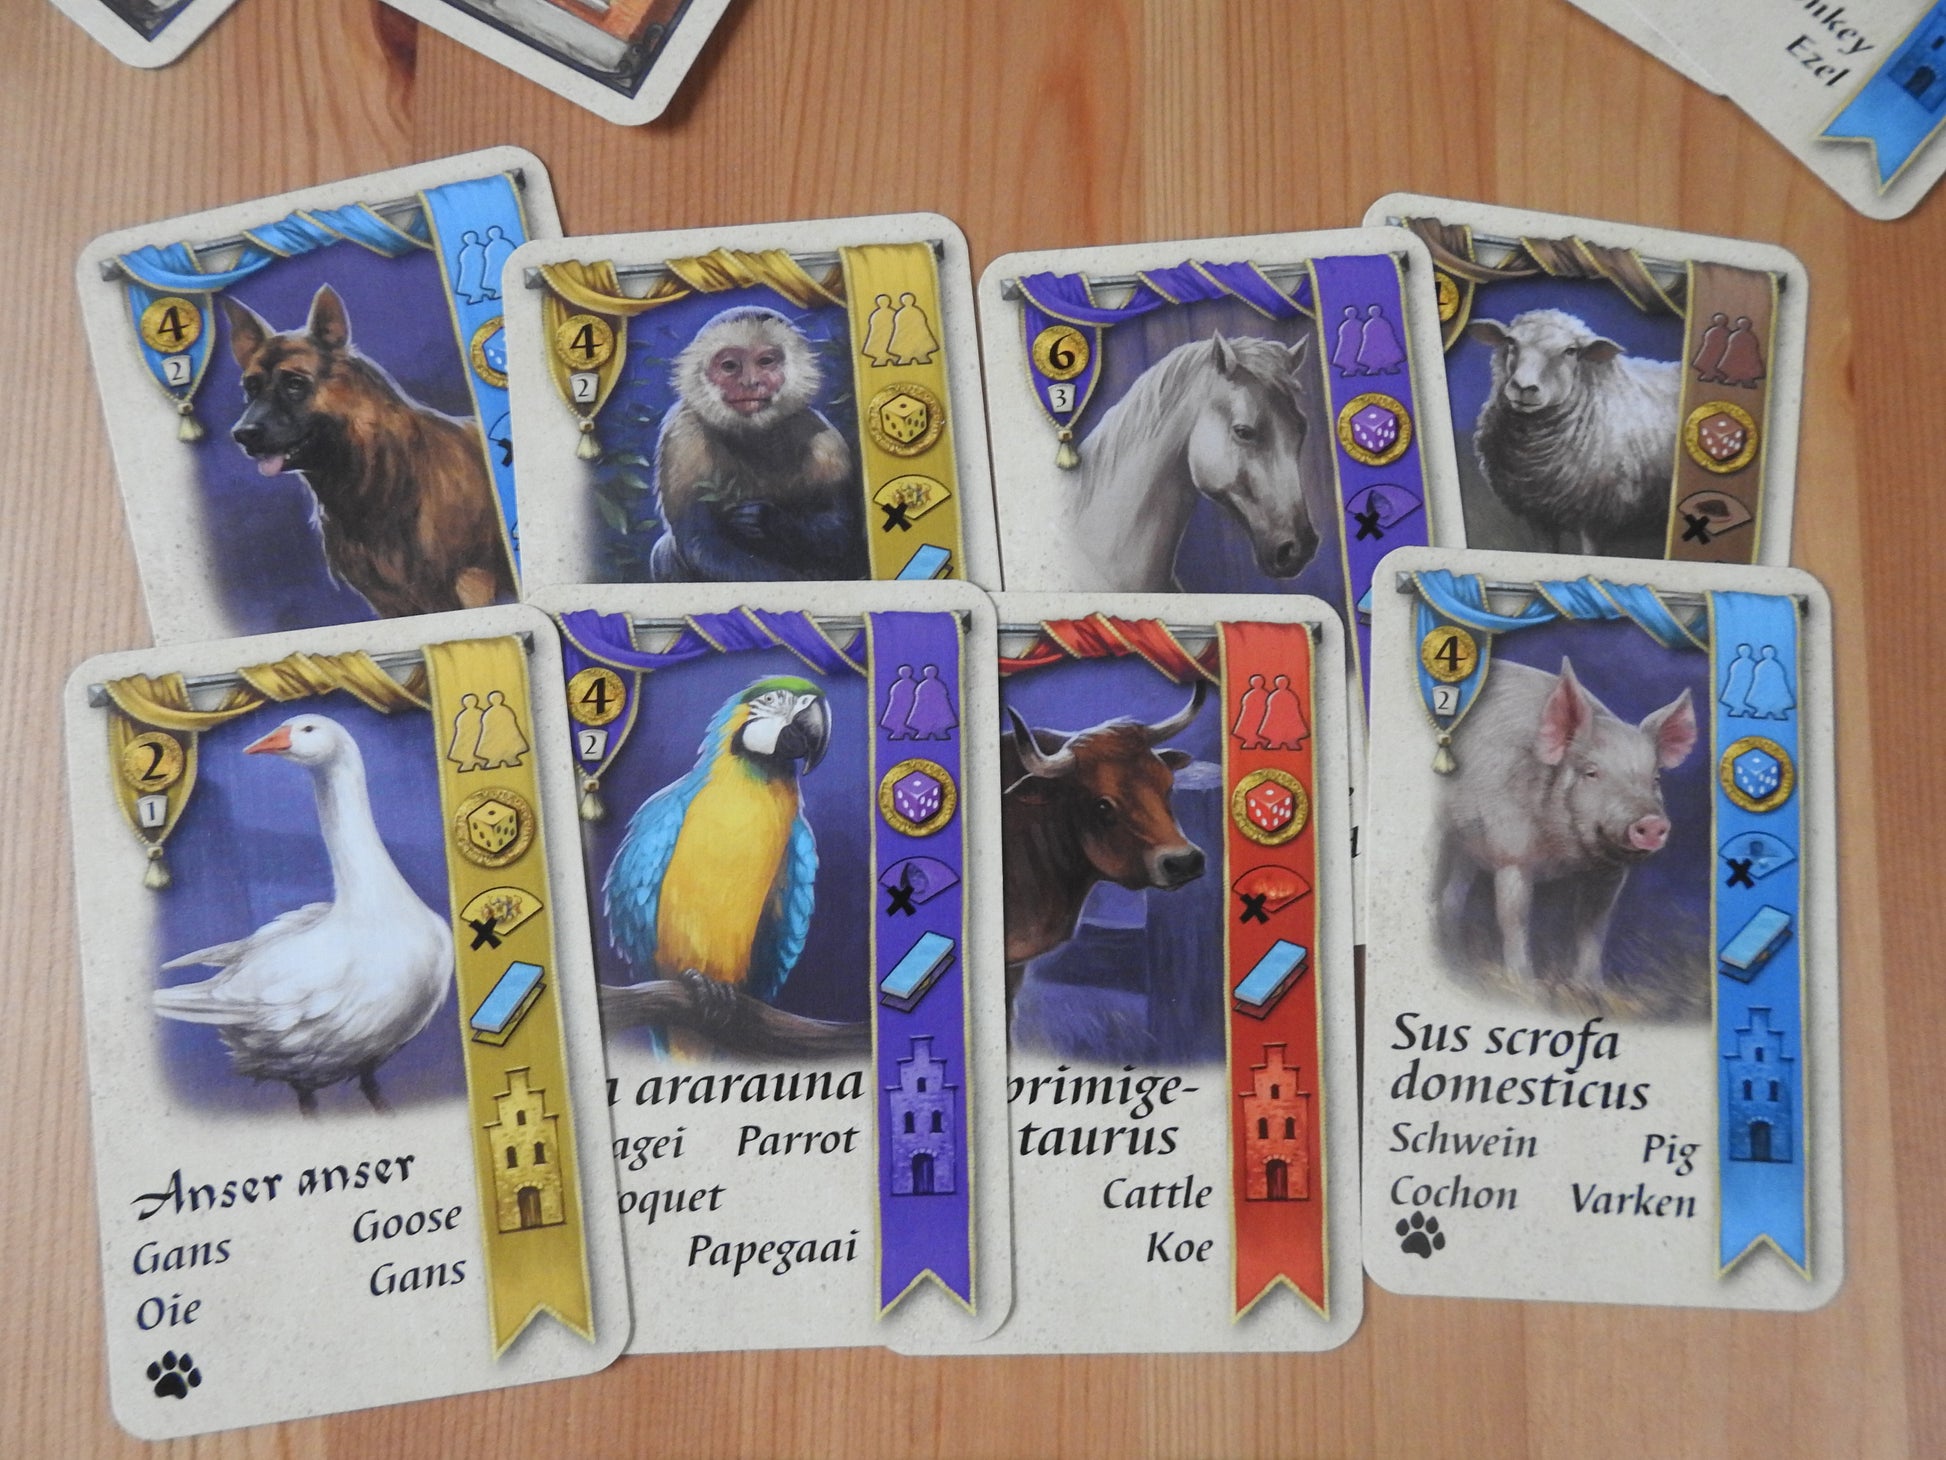 View of 8 of the pet cards included.